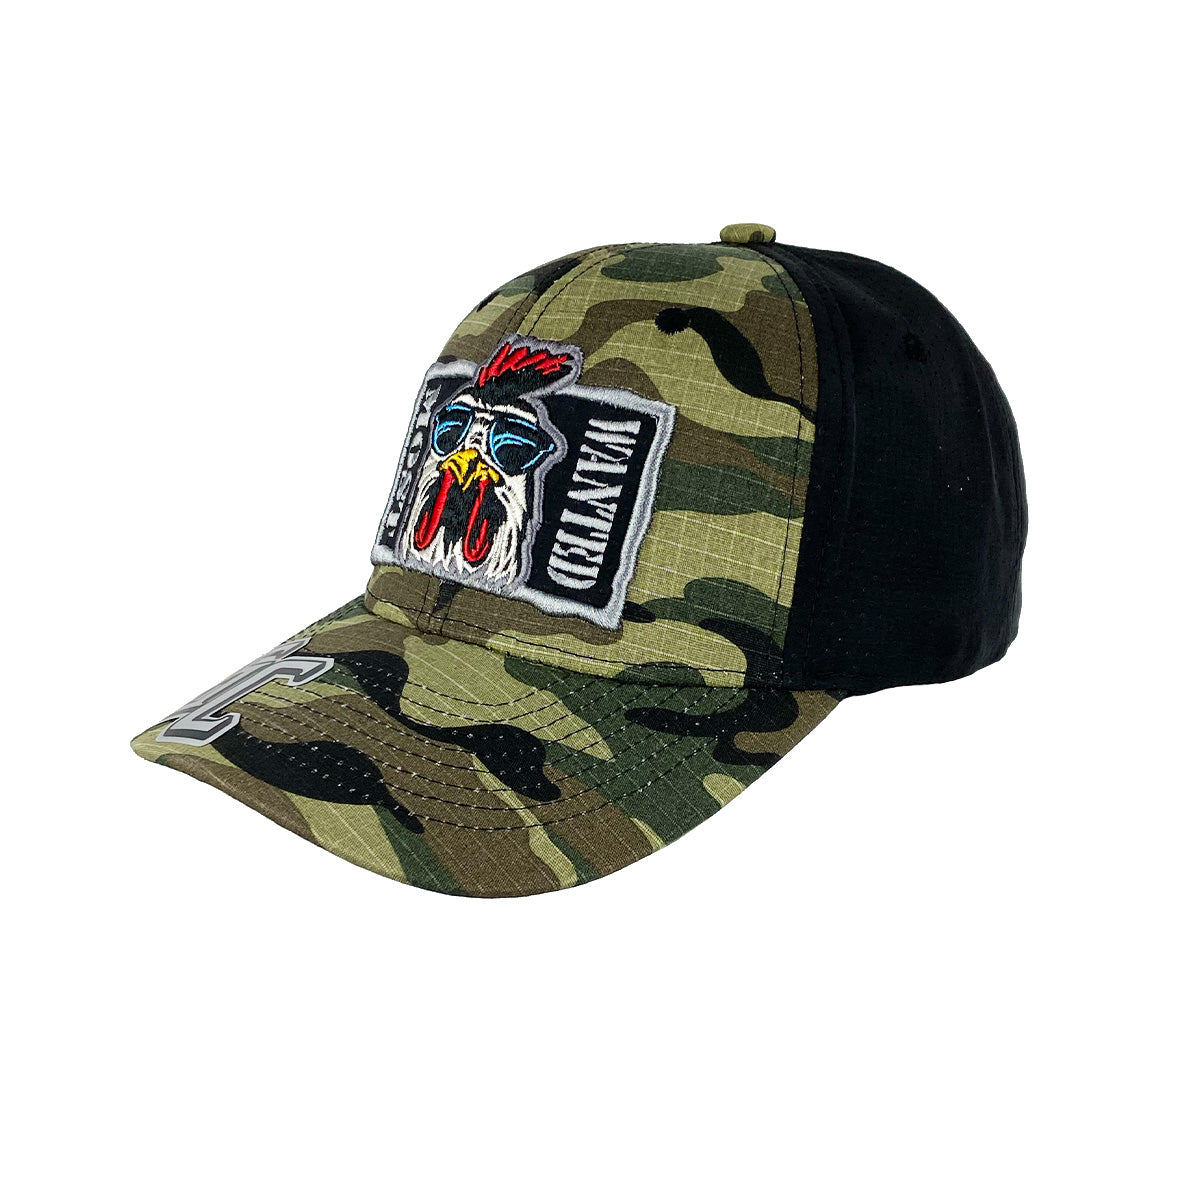 Snapback "Most Wanted" Hat Embroidered